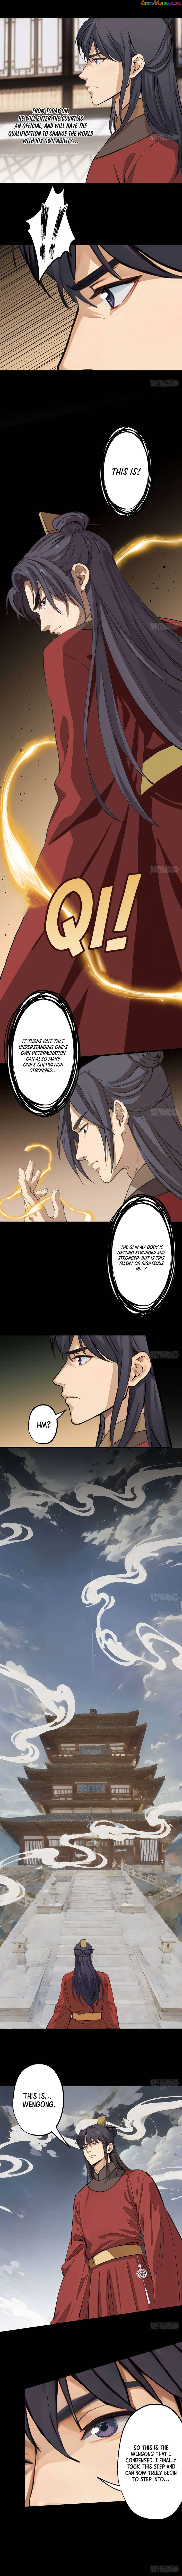 The Imperial Censor Who Can Handle It He Speaks Truly When There’s Trouble Chapter 7 - Page 2